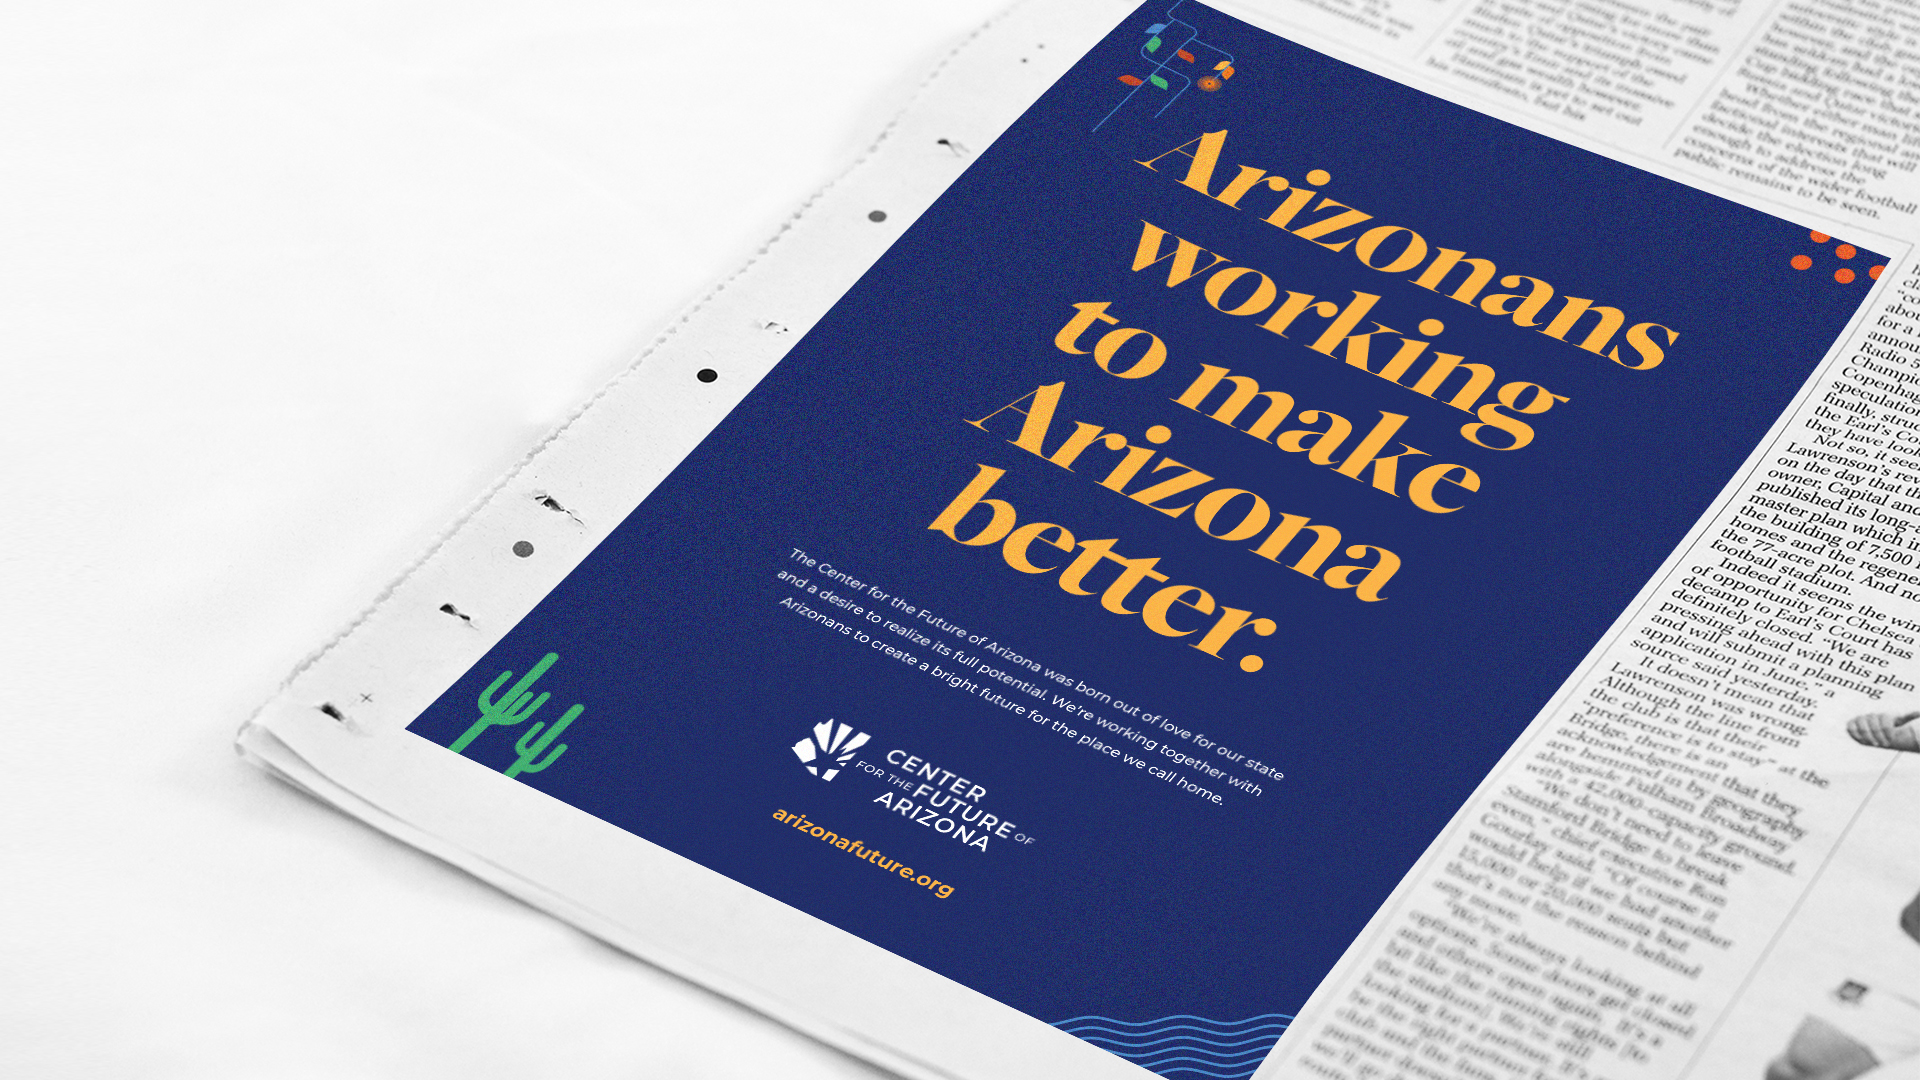 featured image two:Center for the Future of Arizona Rebrand & Print Campaign